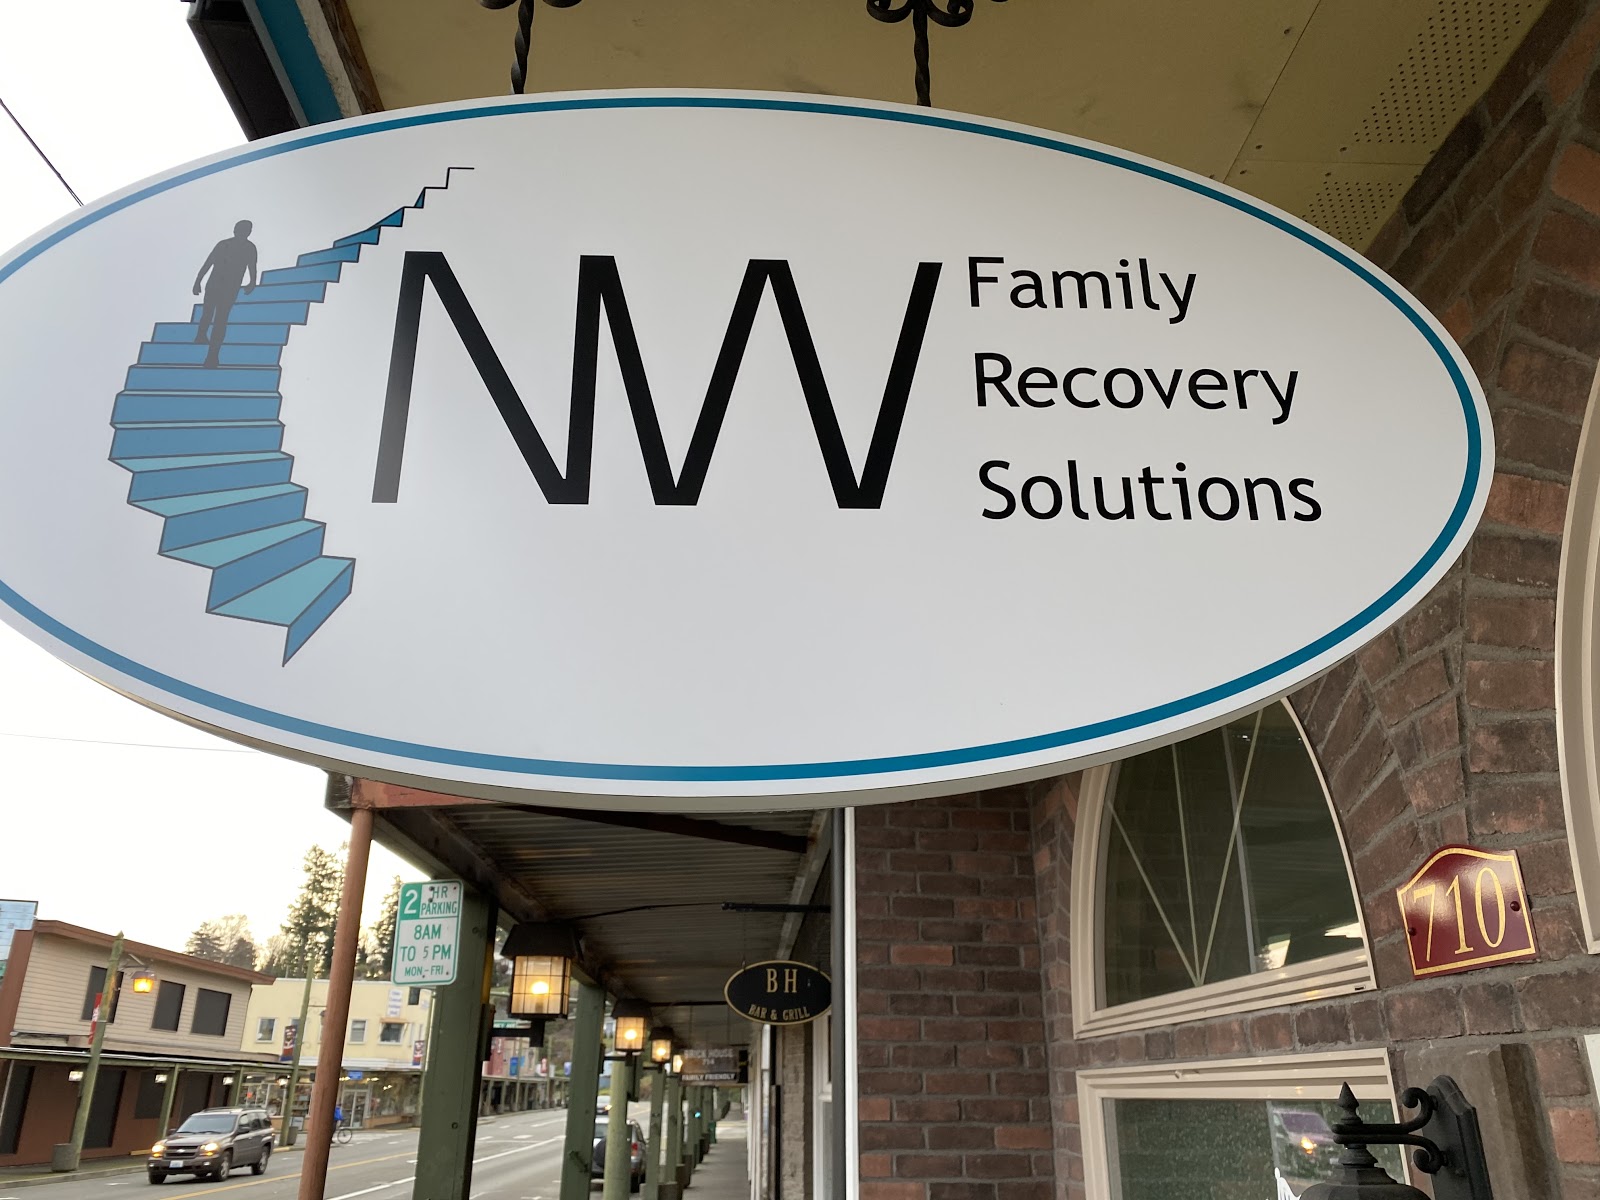 NW Family Recovery Solutions